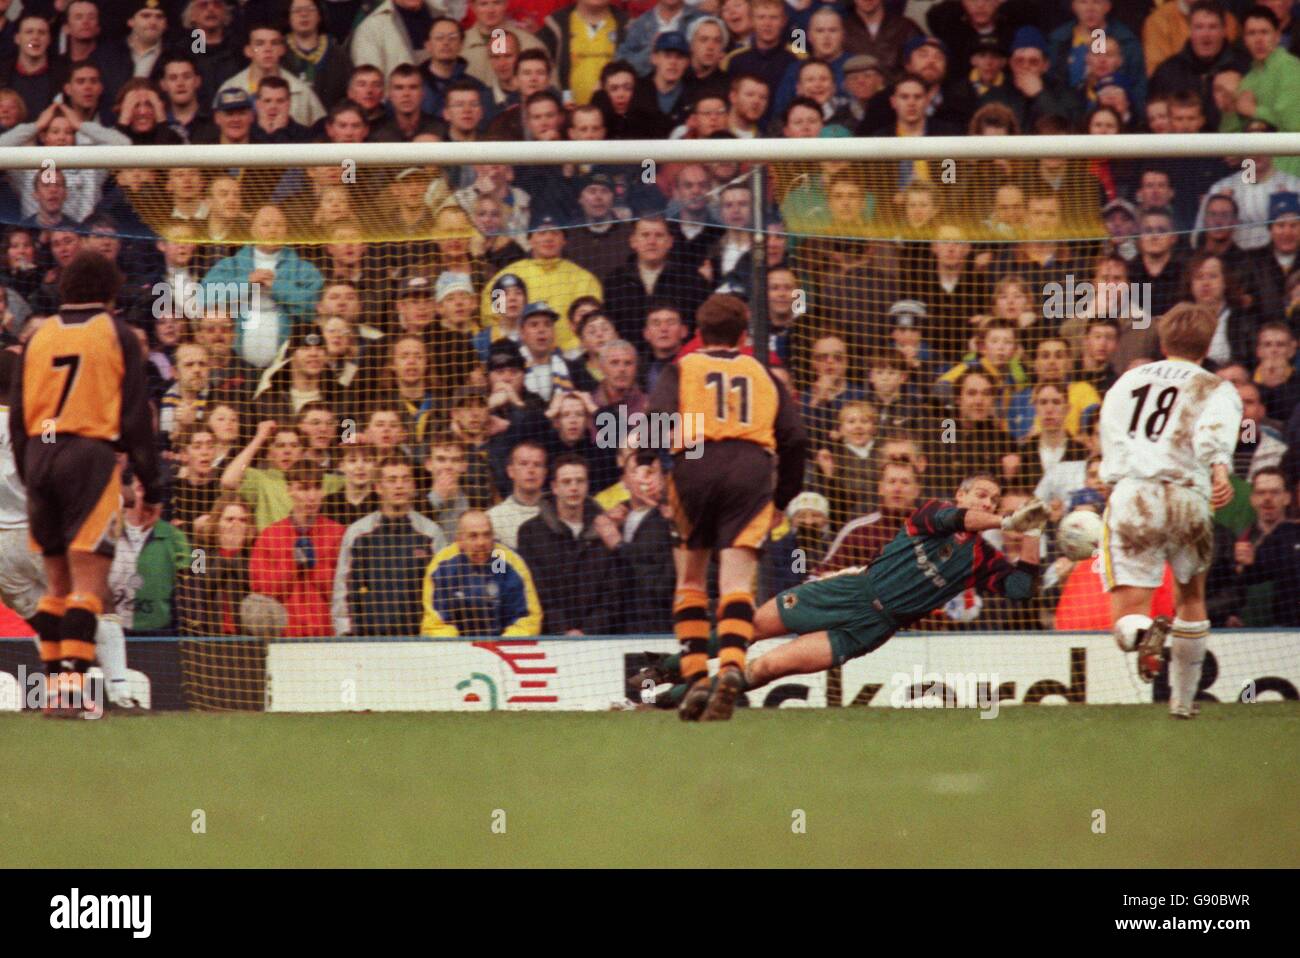 Soccer - Littlewoods FA Cup Quarter Final - Leeds United v Wolverhampton Wanderers. Wolverhampton Wanderers' Hans Segers saves a penalty taken by Jimmy Floyd Hasselbaink, Leeds United Stock Photo